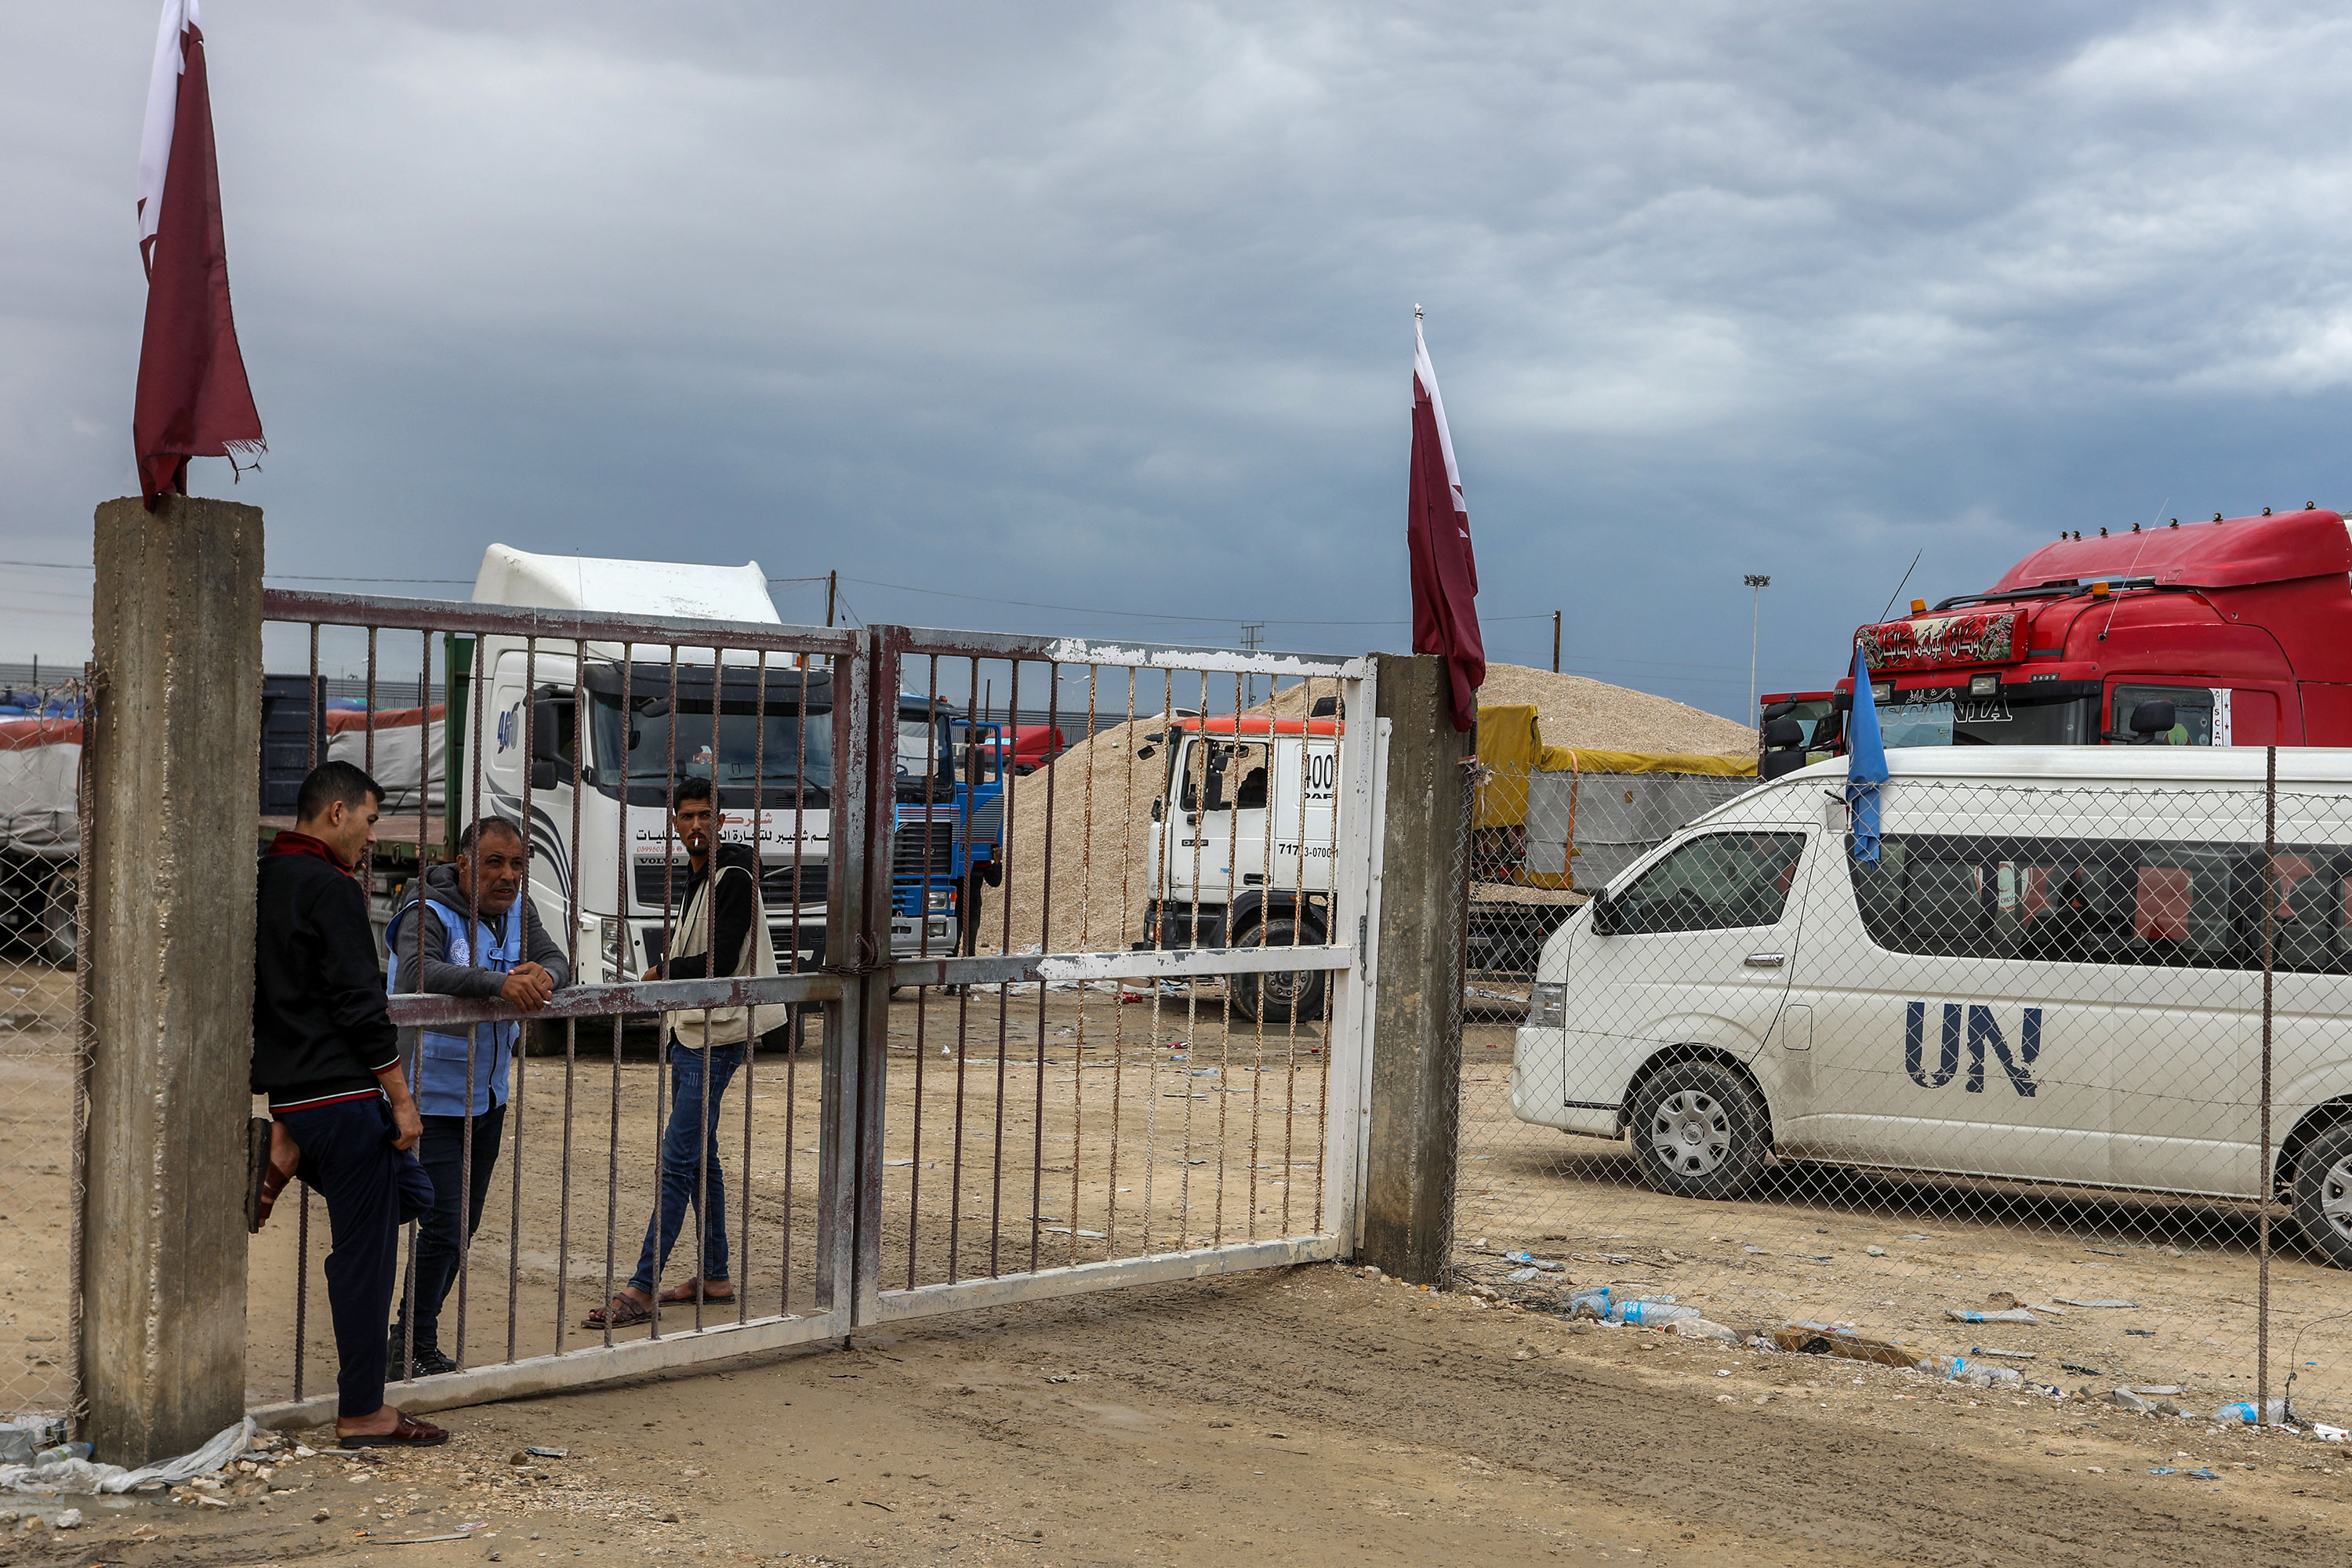 Members of the United Nations supervise as trucks loaded with aid and food enter Gaza through the Kerem Shalom crossing on November 15.